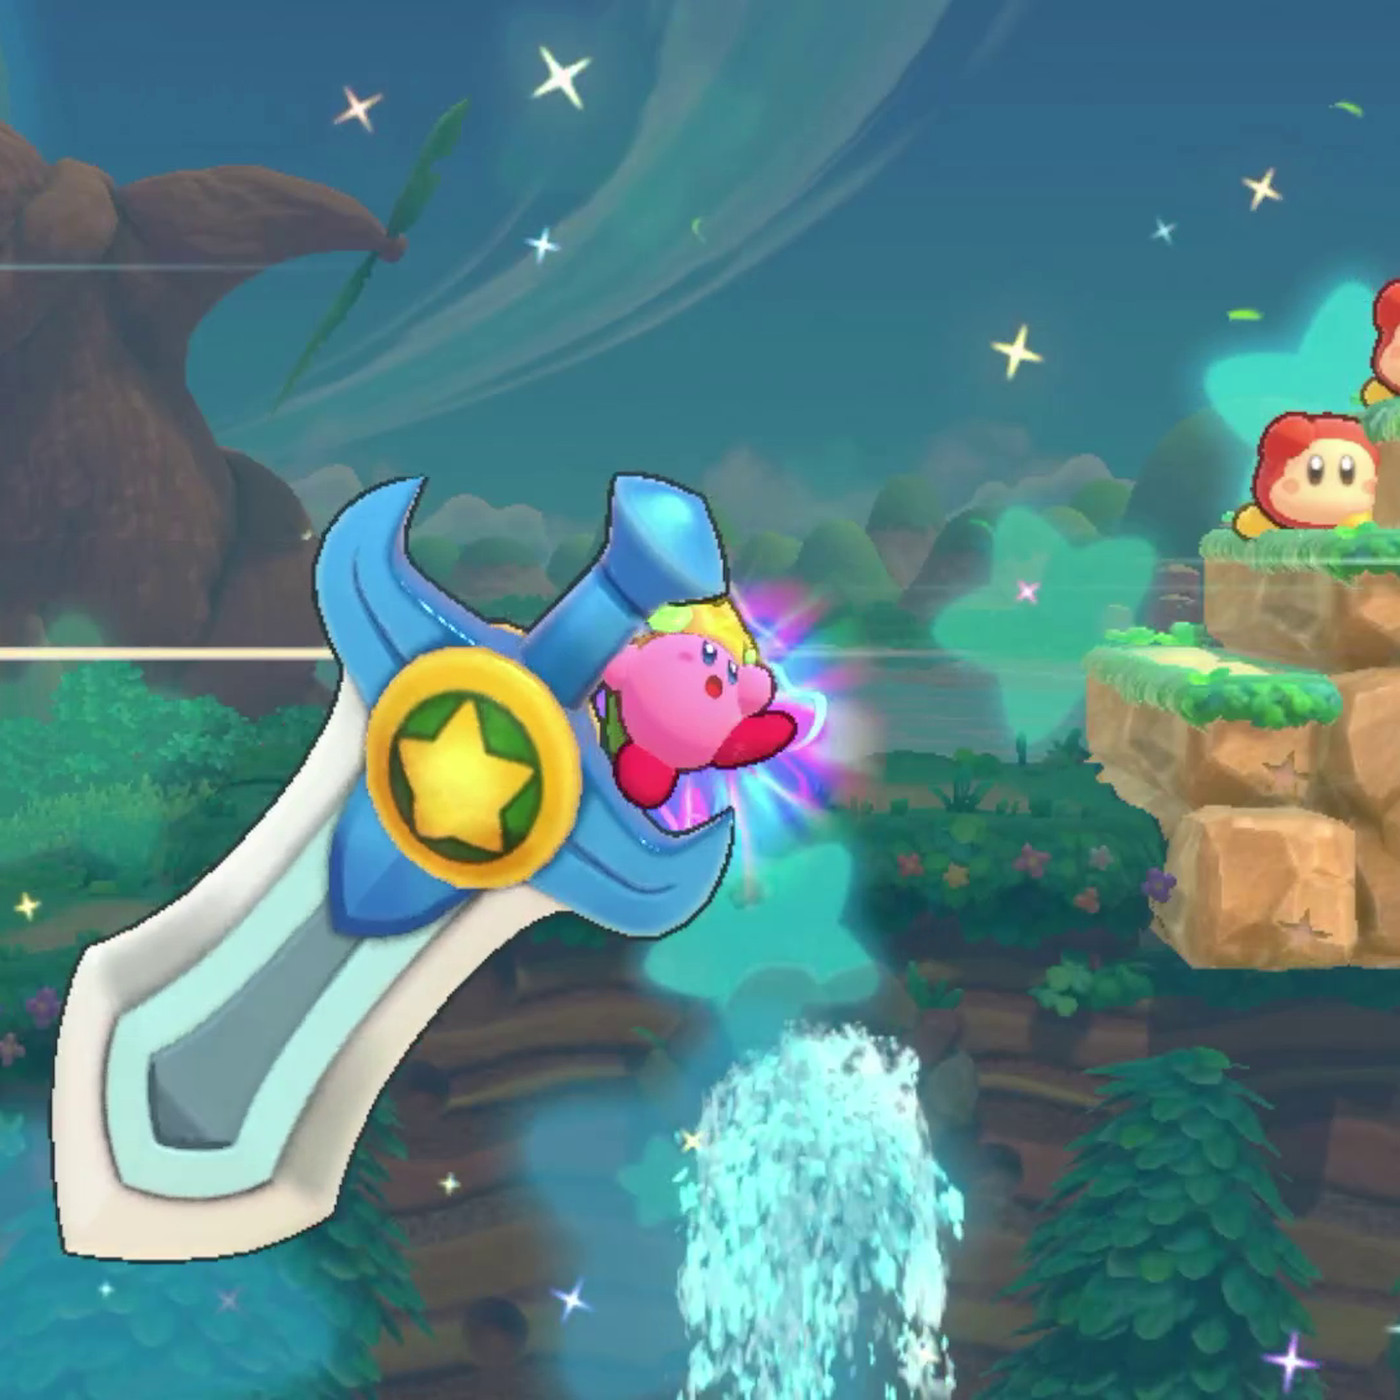 Kirby's Return to Dream Land Deluxe is a remake of the Wii coop game